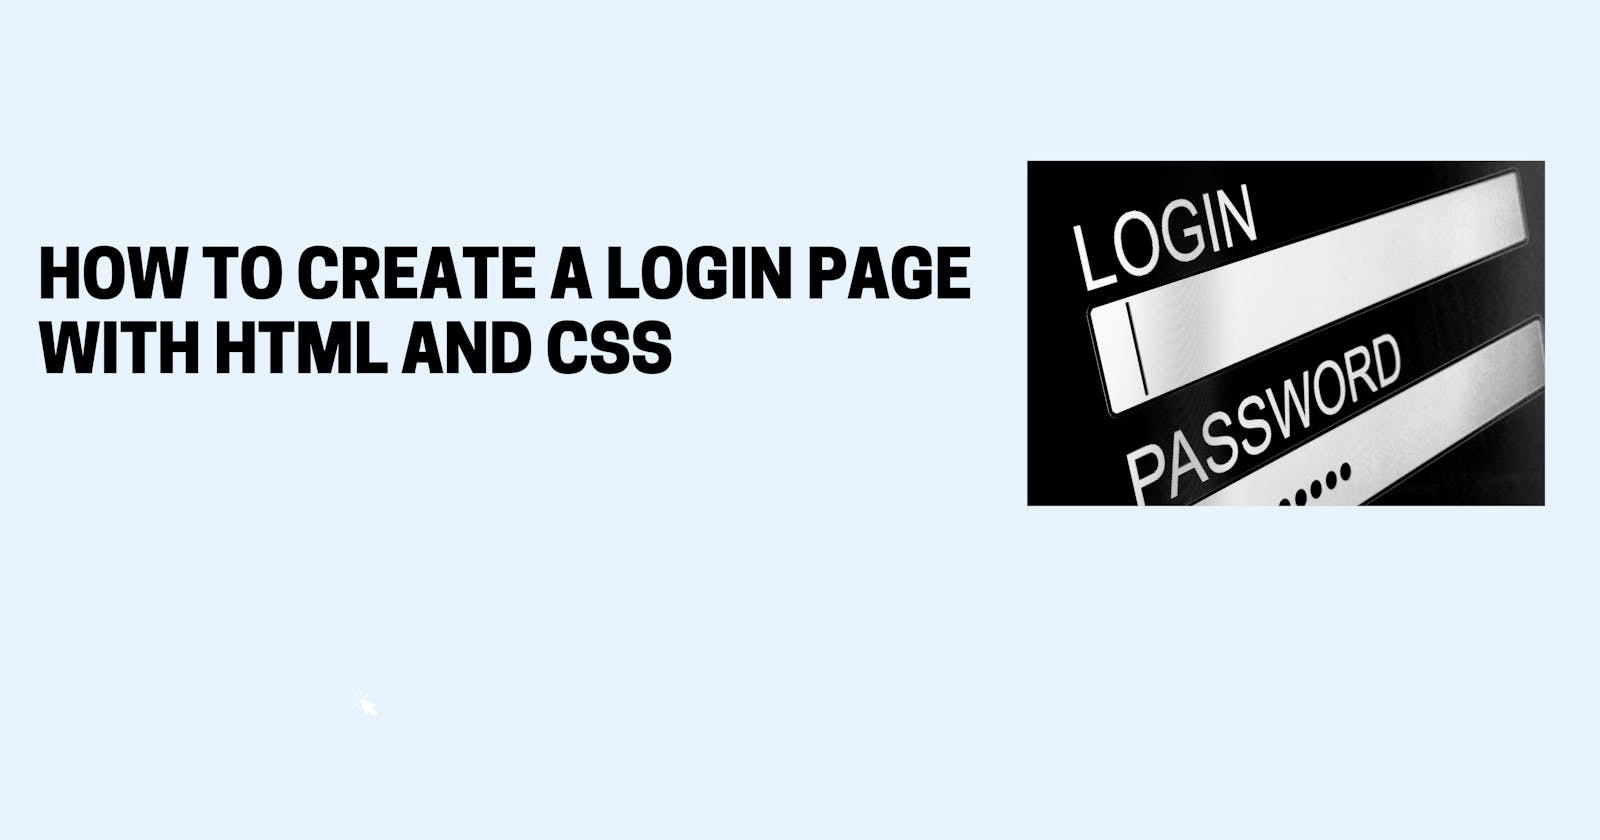 How To Create A Login Page With HTML And CSS